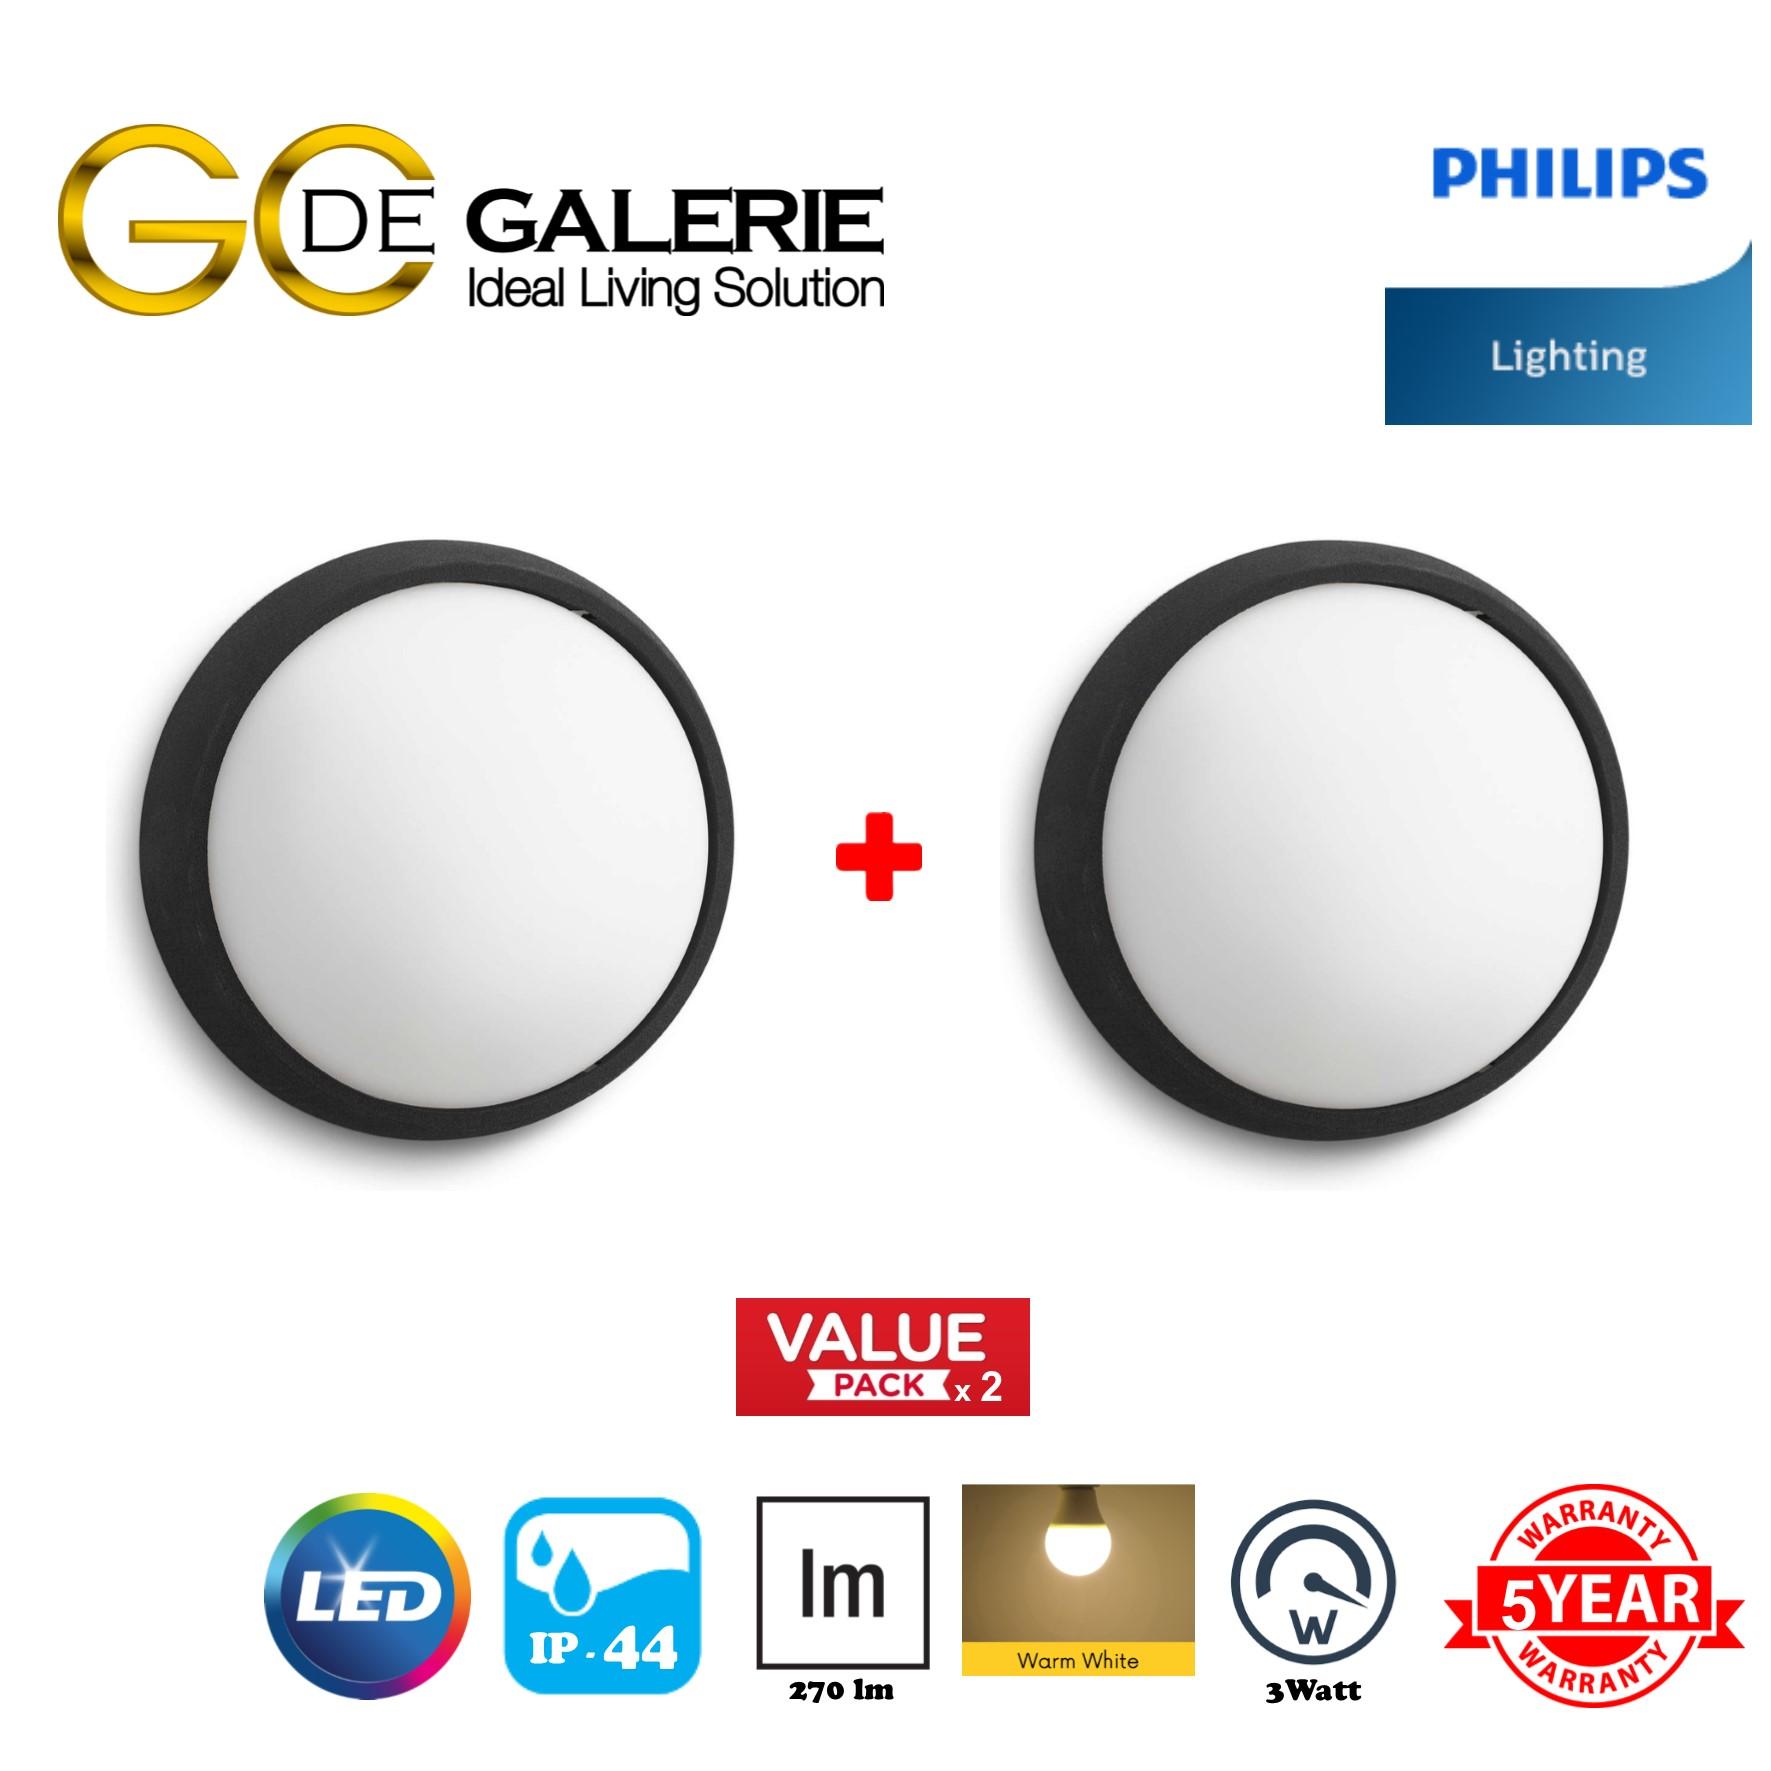 WALL LIGHT OUTDOOR LED PHILIPS 17304 EAGLE BK 1x3.5W SEL (2 PACK)